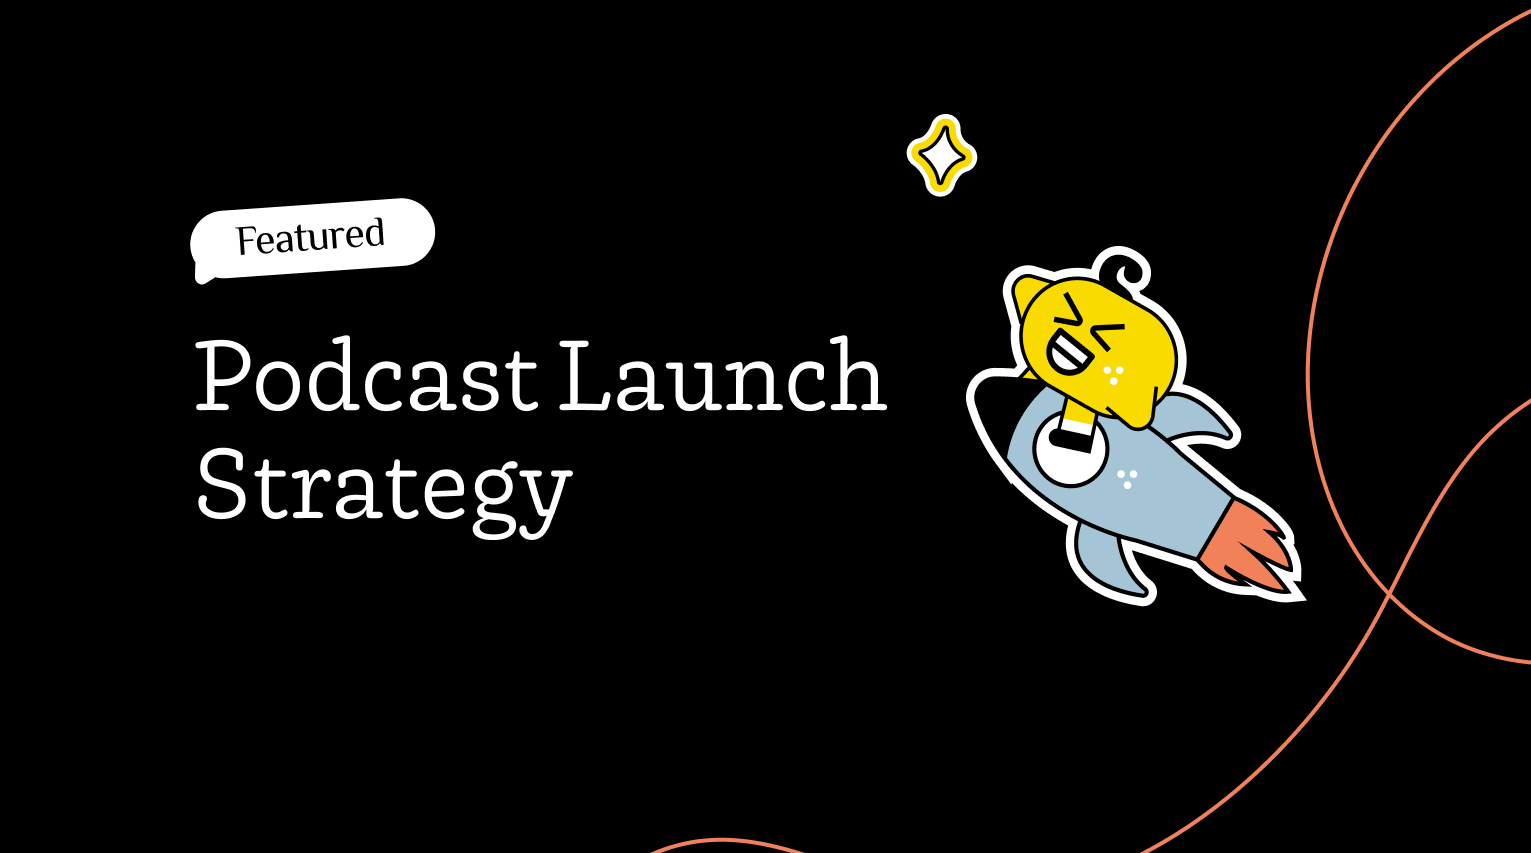 Podcast Launch Strategy App